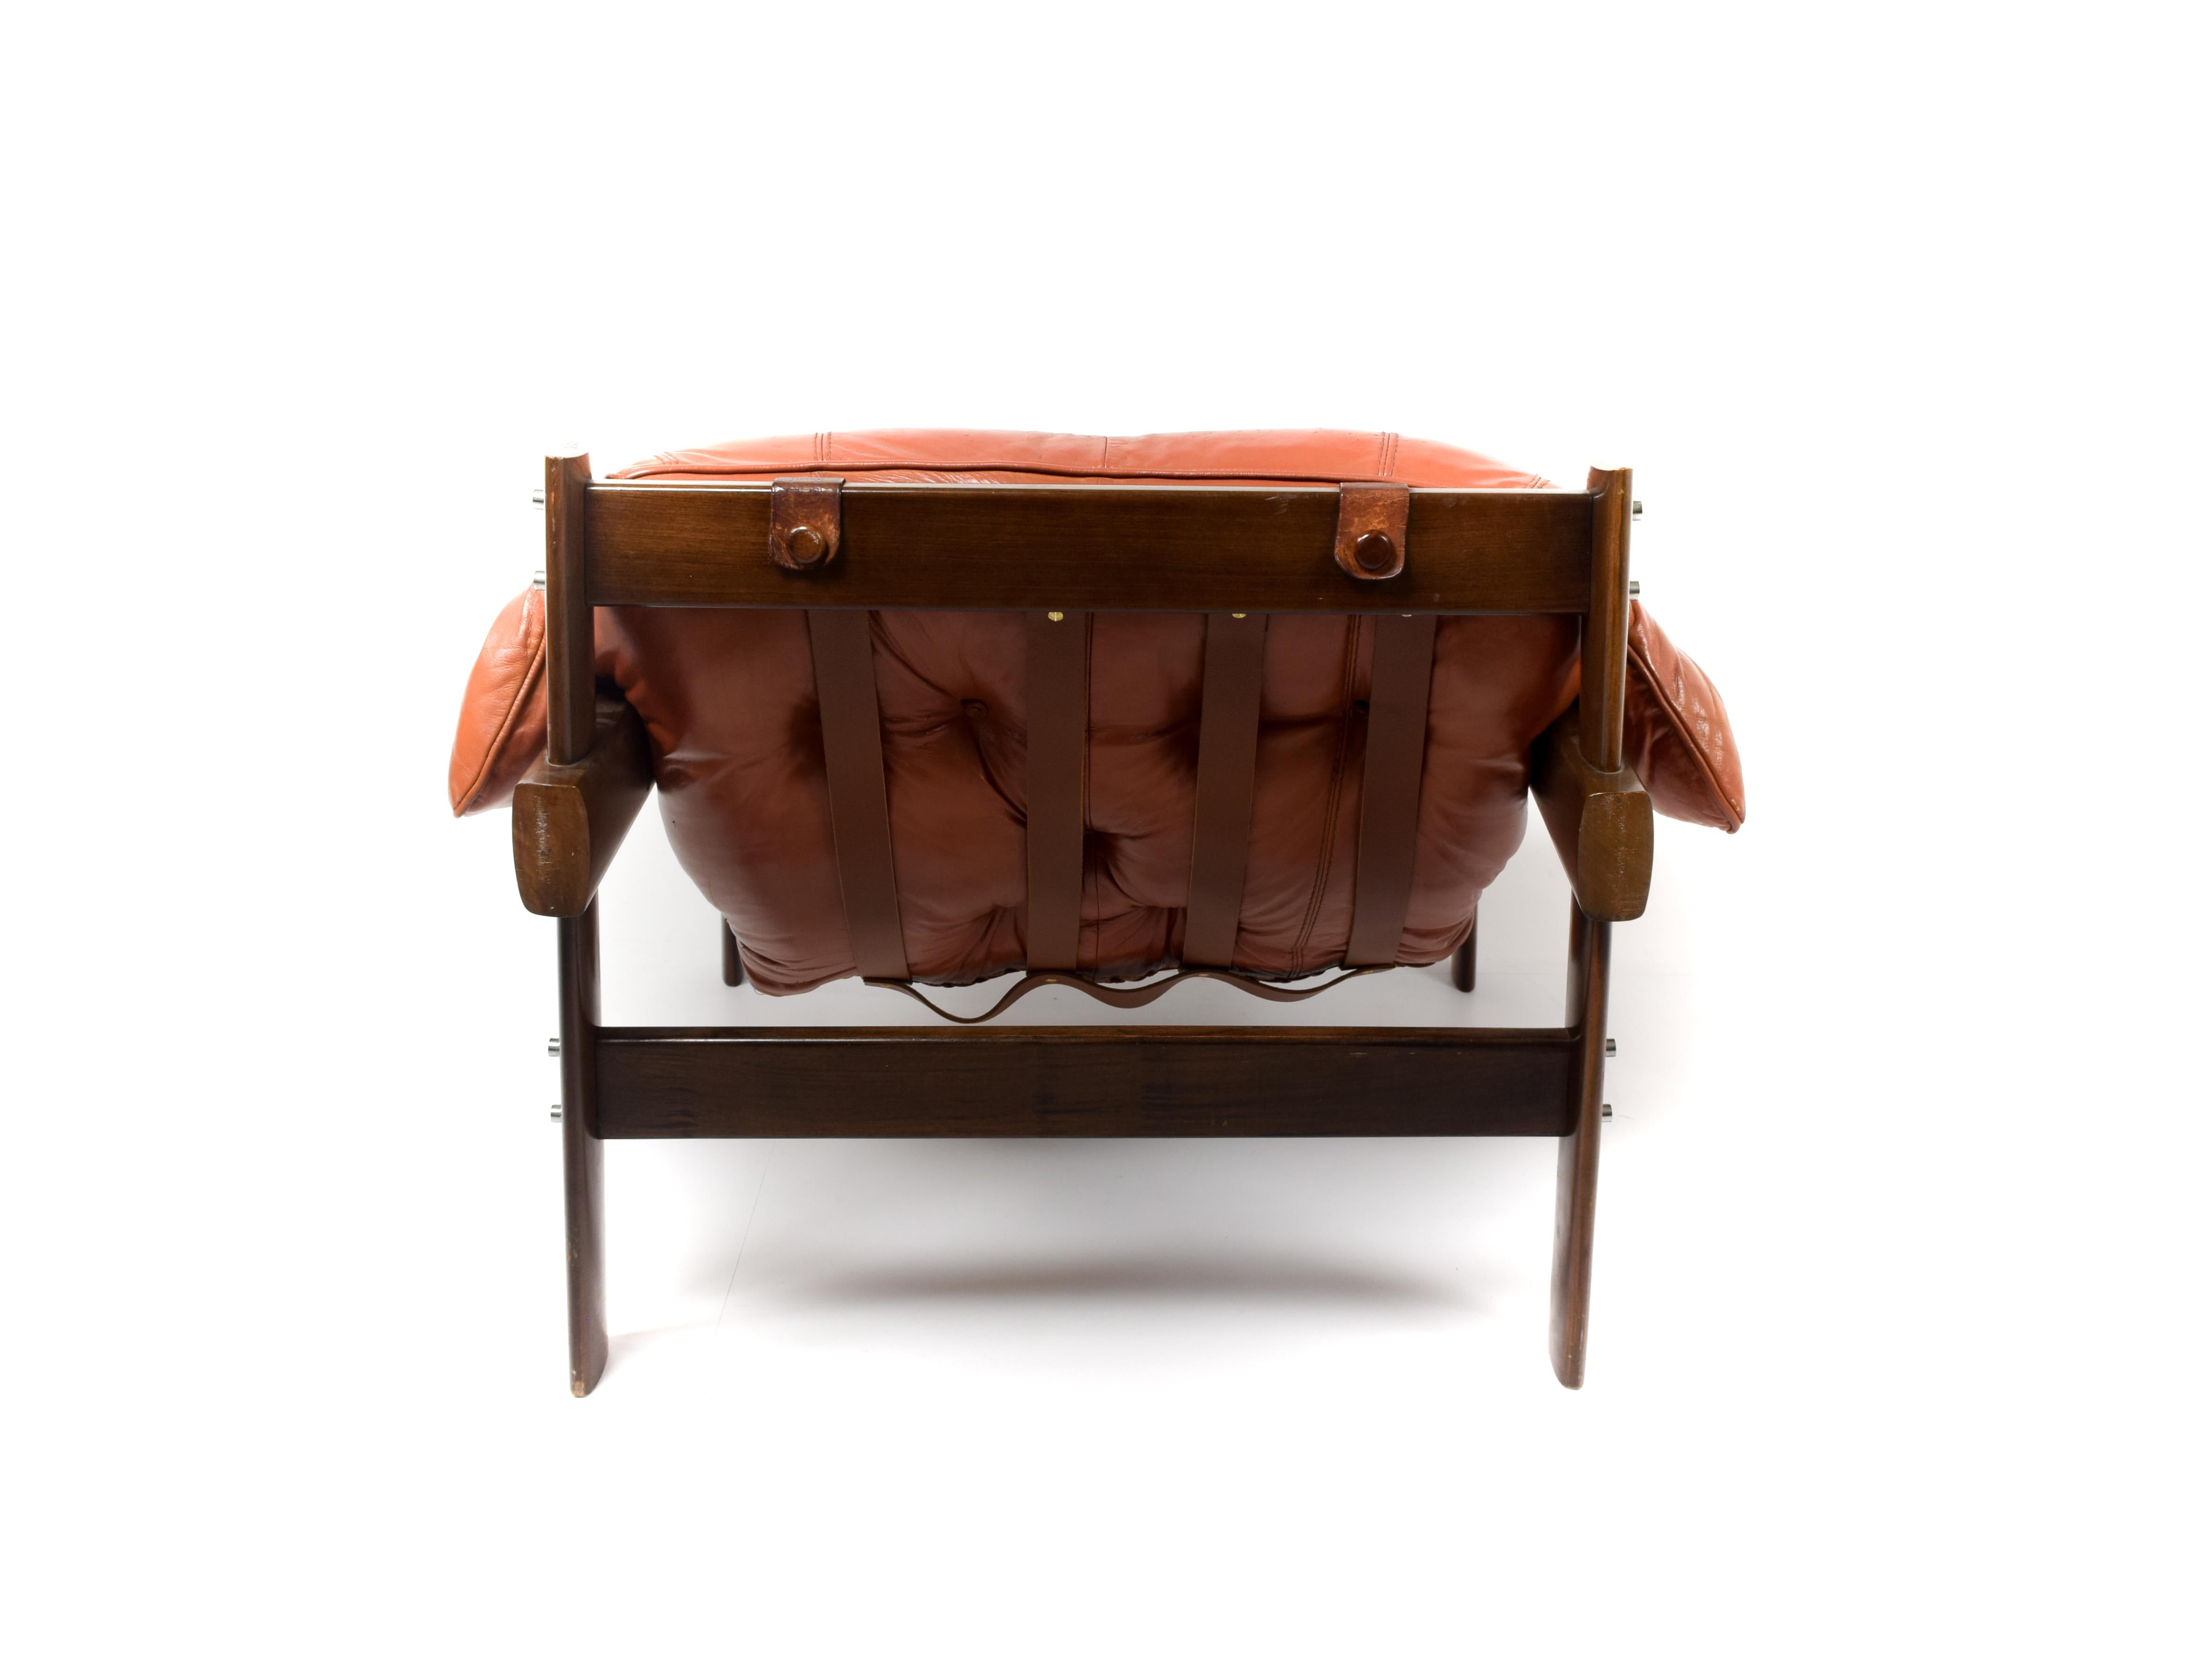 Brazilian Percival Lafer Lounge Chair MP 41 in Leather and Jacaranda Wood, Brazil, 1960s